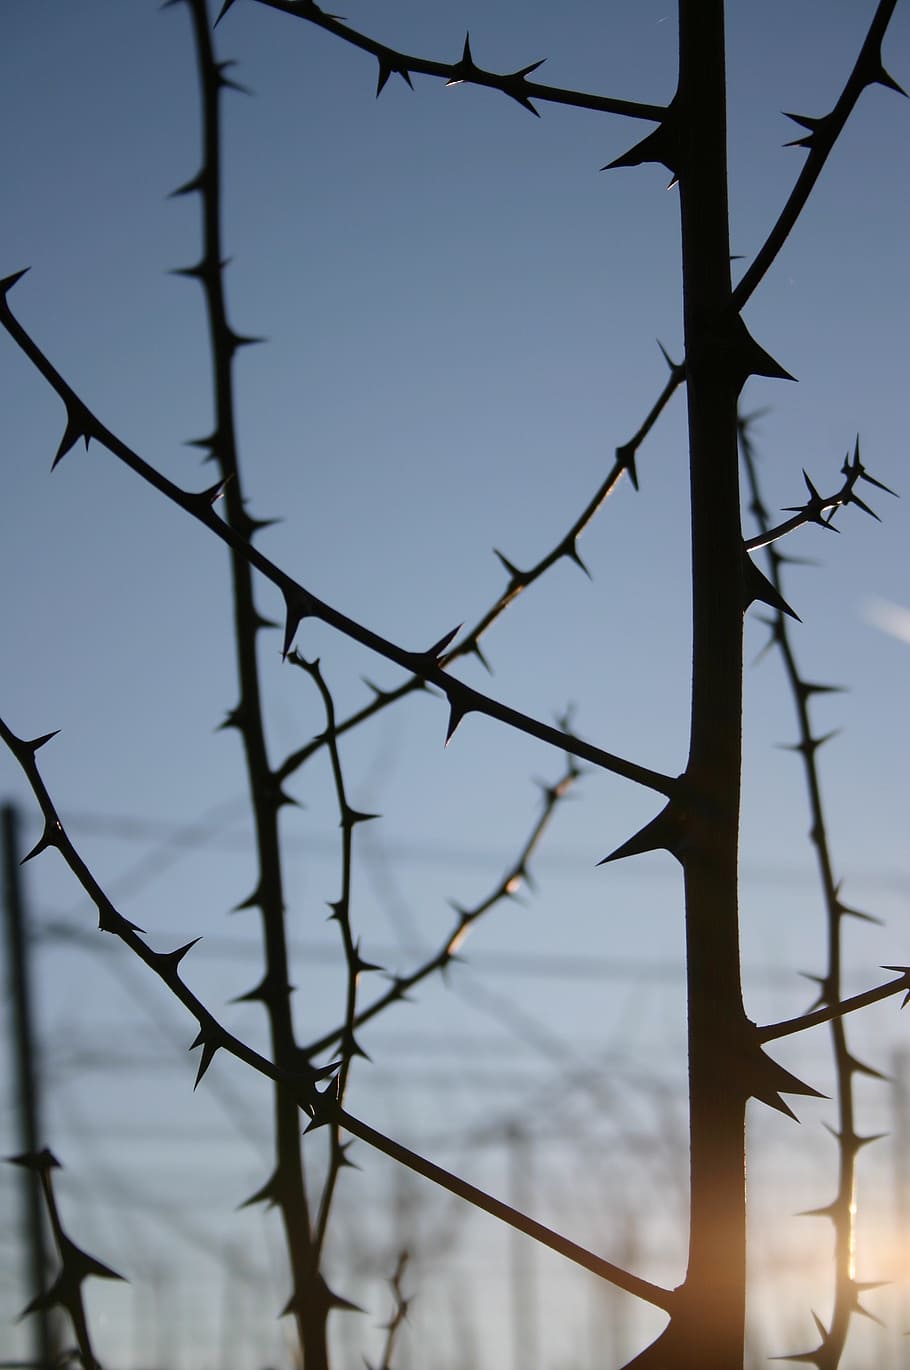 spur, thorns, lichtspiel, close, prickly, plant, nature, branch, day, fence